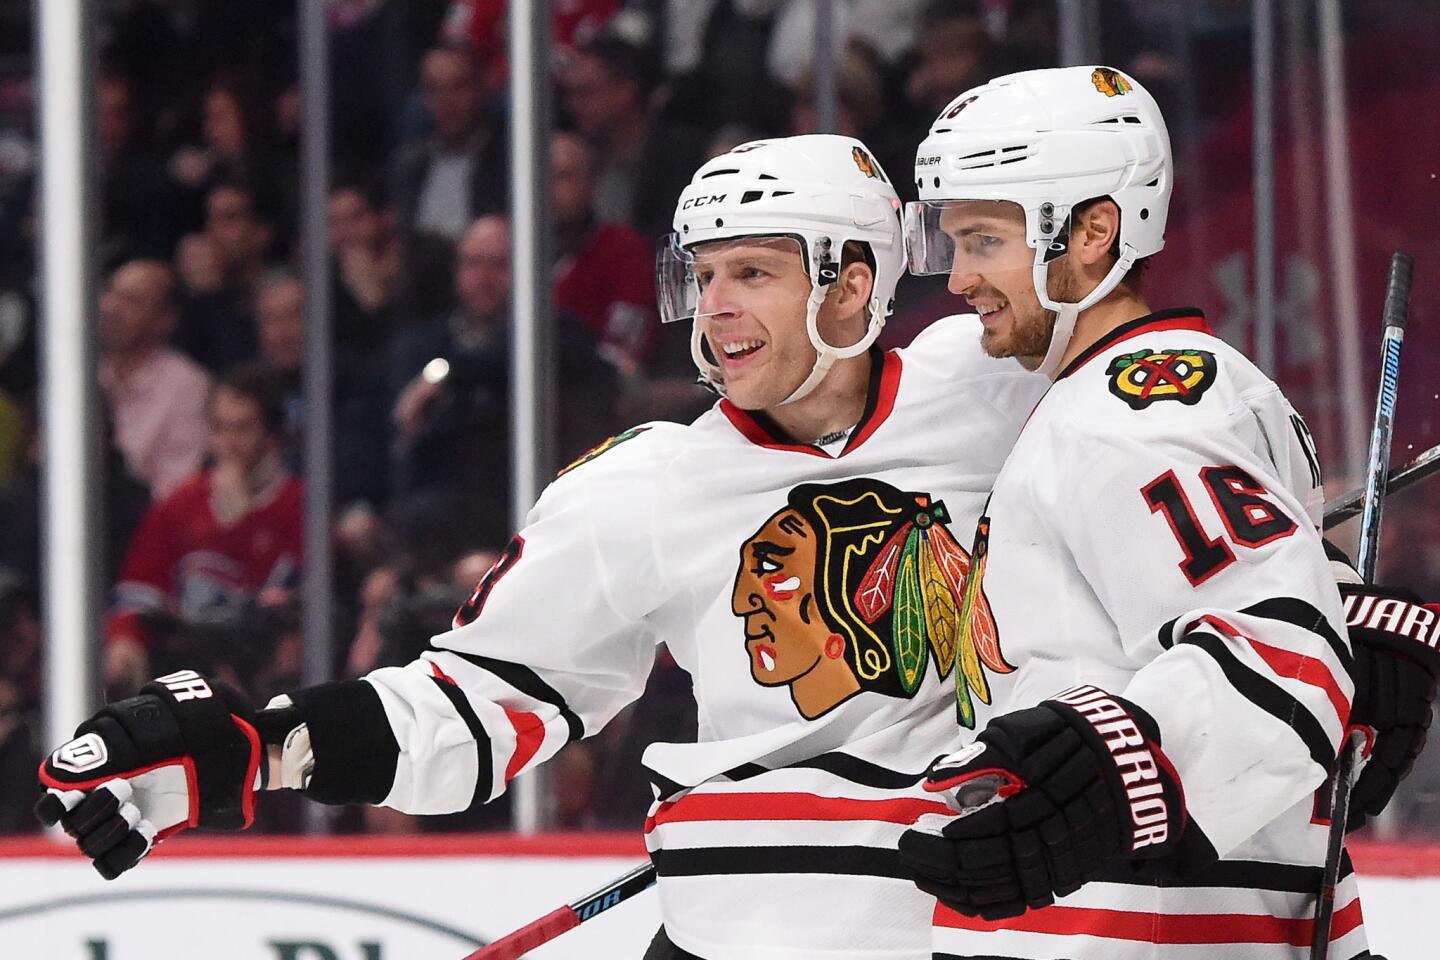 Marcus Kruger celebrates with Kris Versteeg after scoring a goal against the Montreal Canadiens.